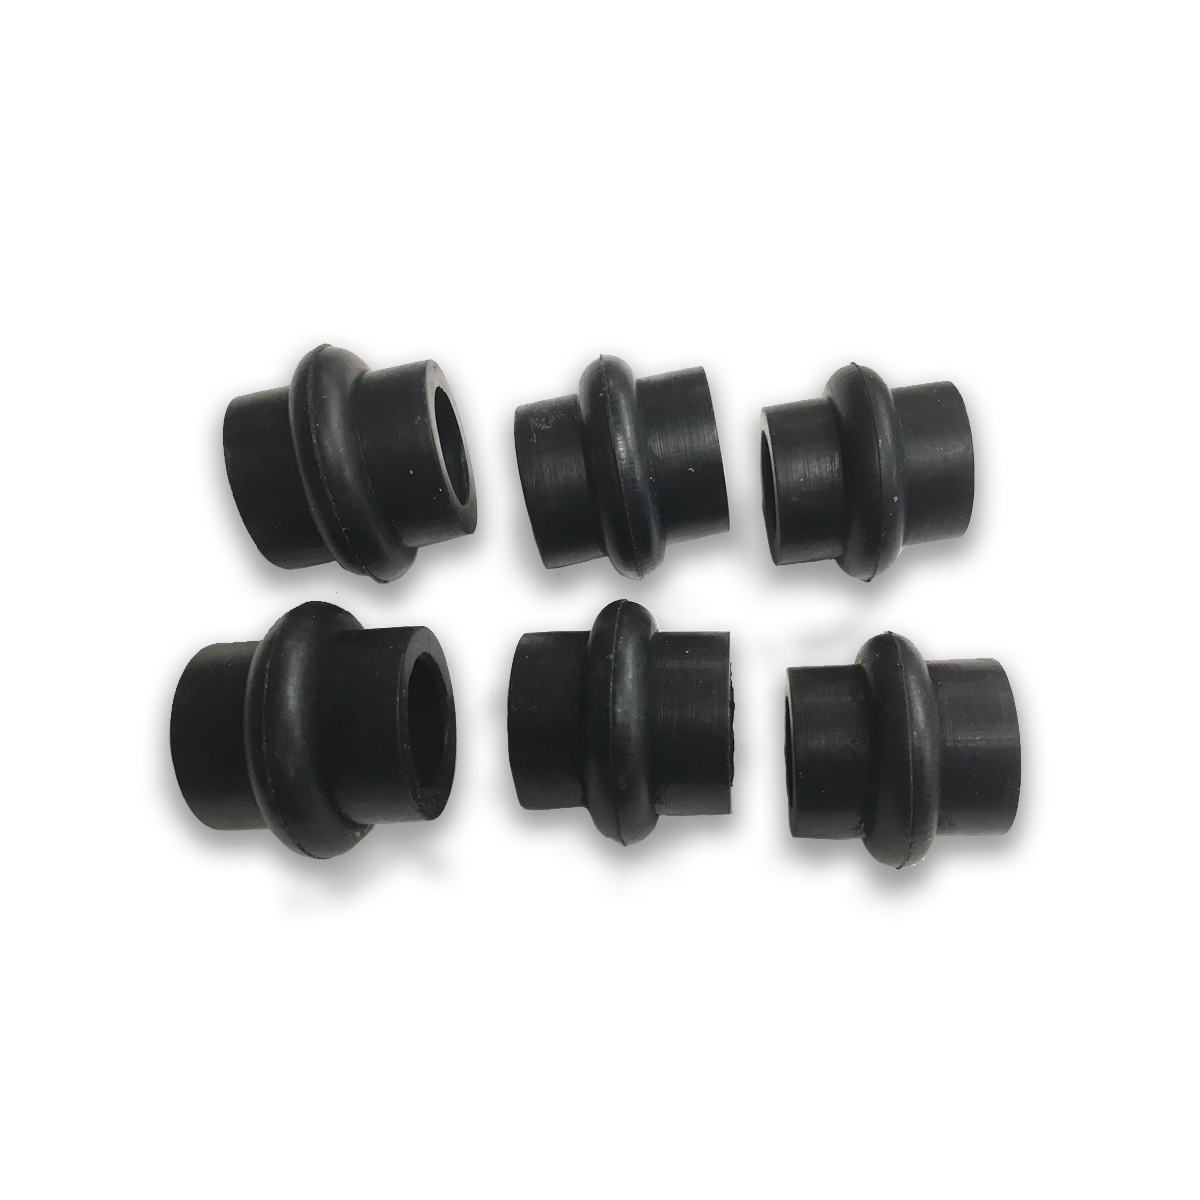 1947-EARLY 1951 SWAY BAR BUSHINGS 1/2T PANEL/SUBURBAN SET OF 6 Chevrolet and GMC Pickup Truck